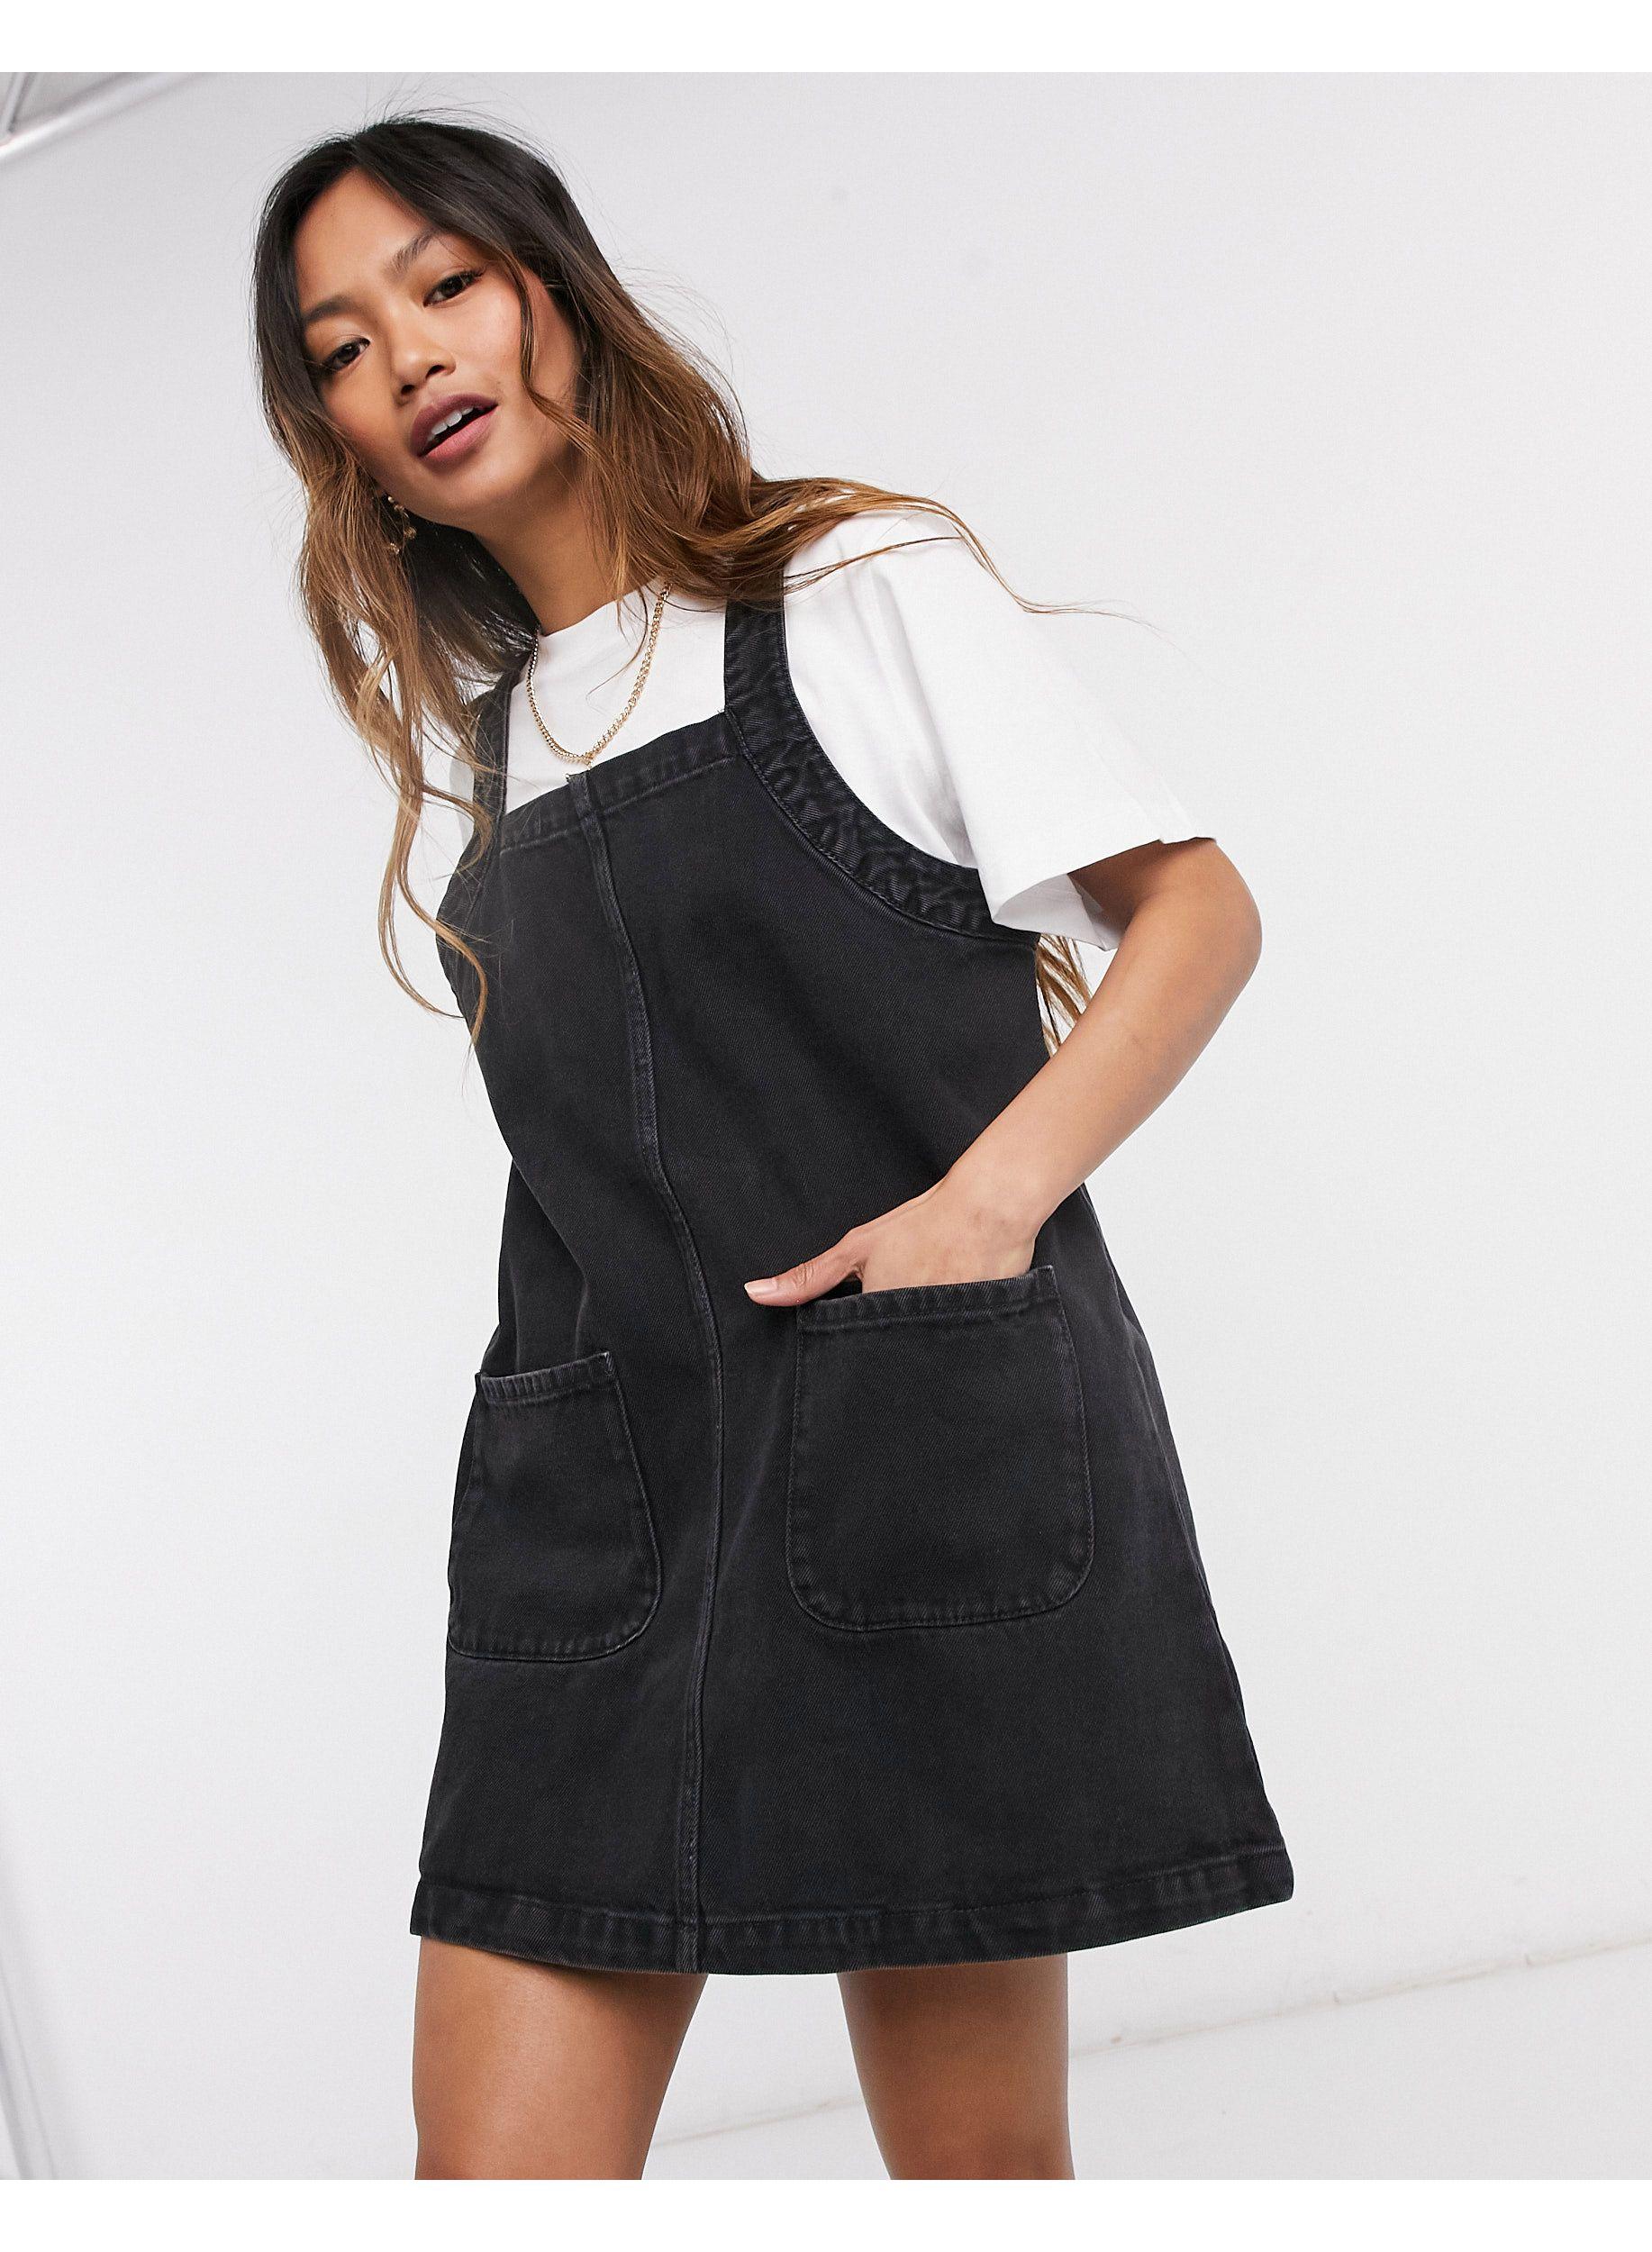 Champagne Vader nachtmerrie Monki Pinafore Dress in Black | Lyst